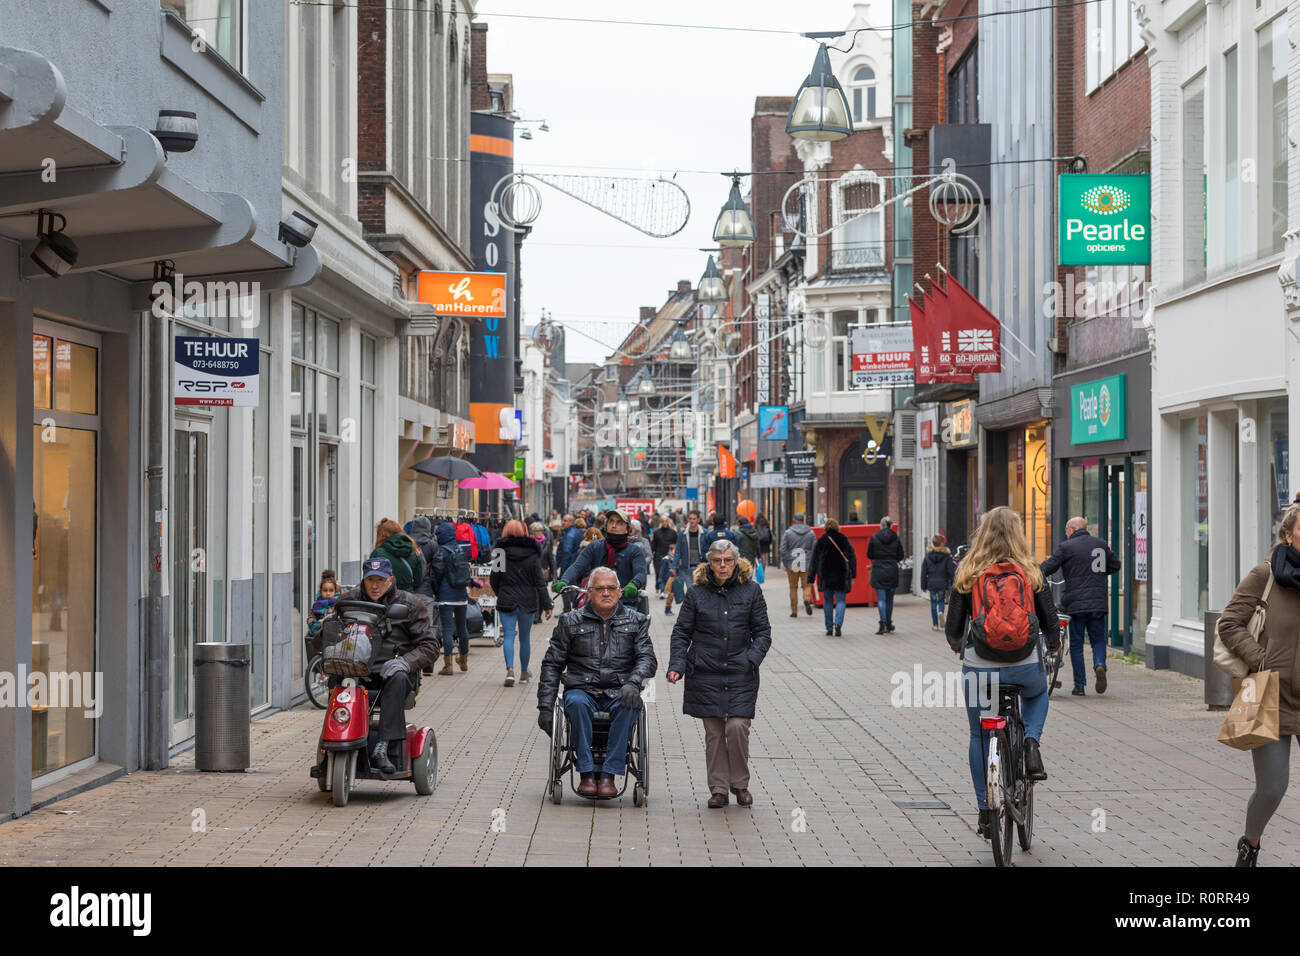 People shopping in pedestrian zone in the inner city of Tilburg with retail shops, Neterlandfs Stock Photo